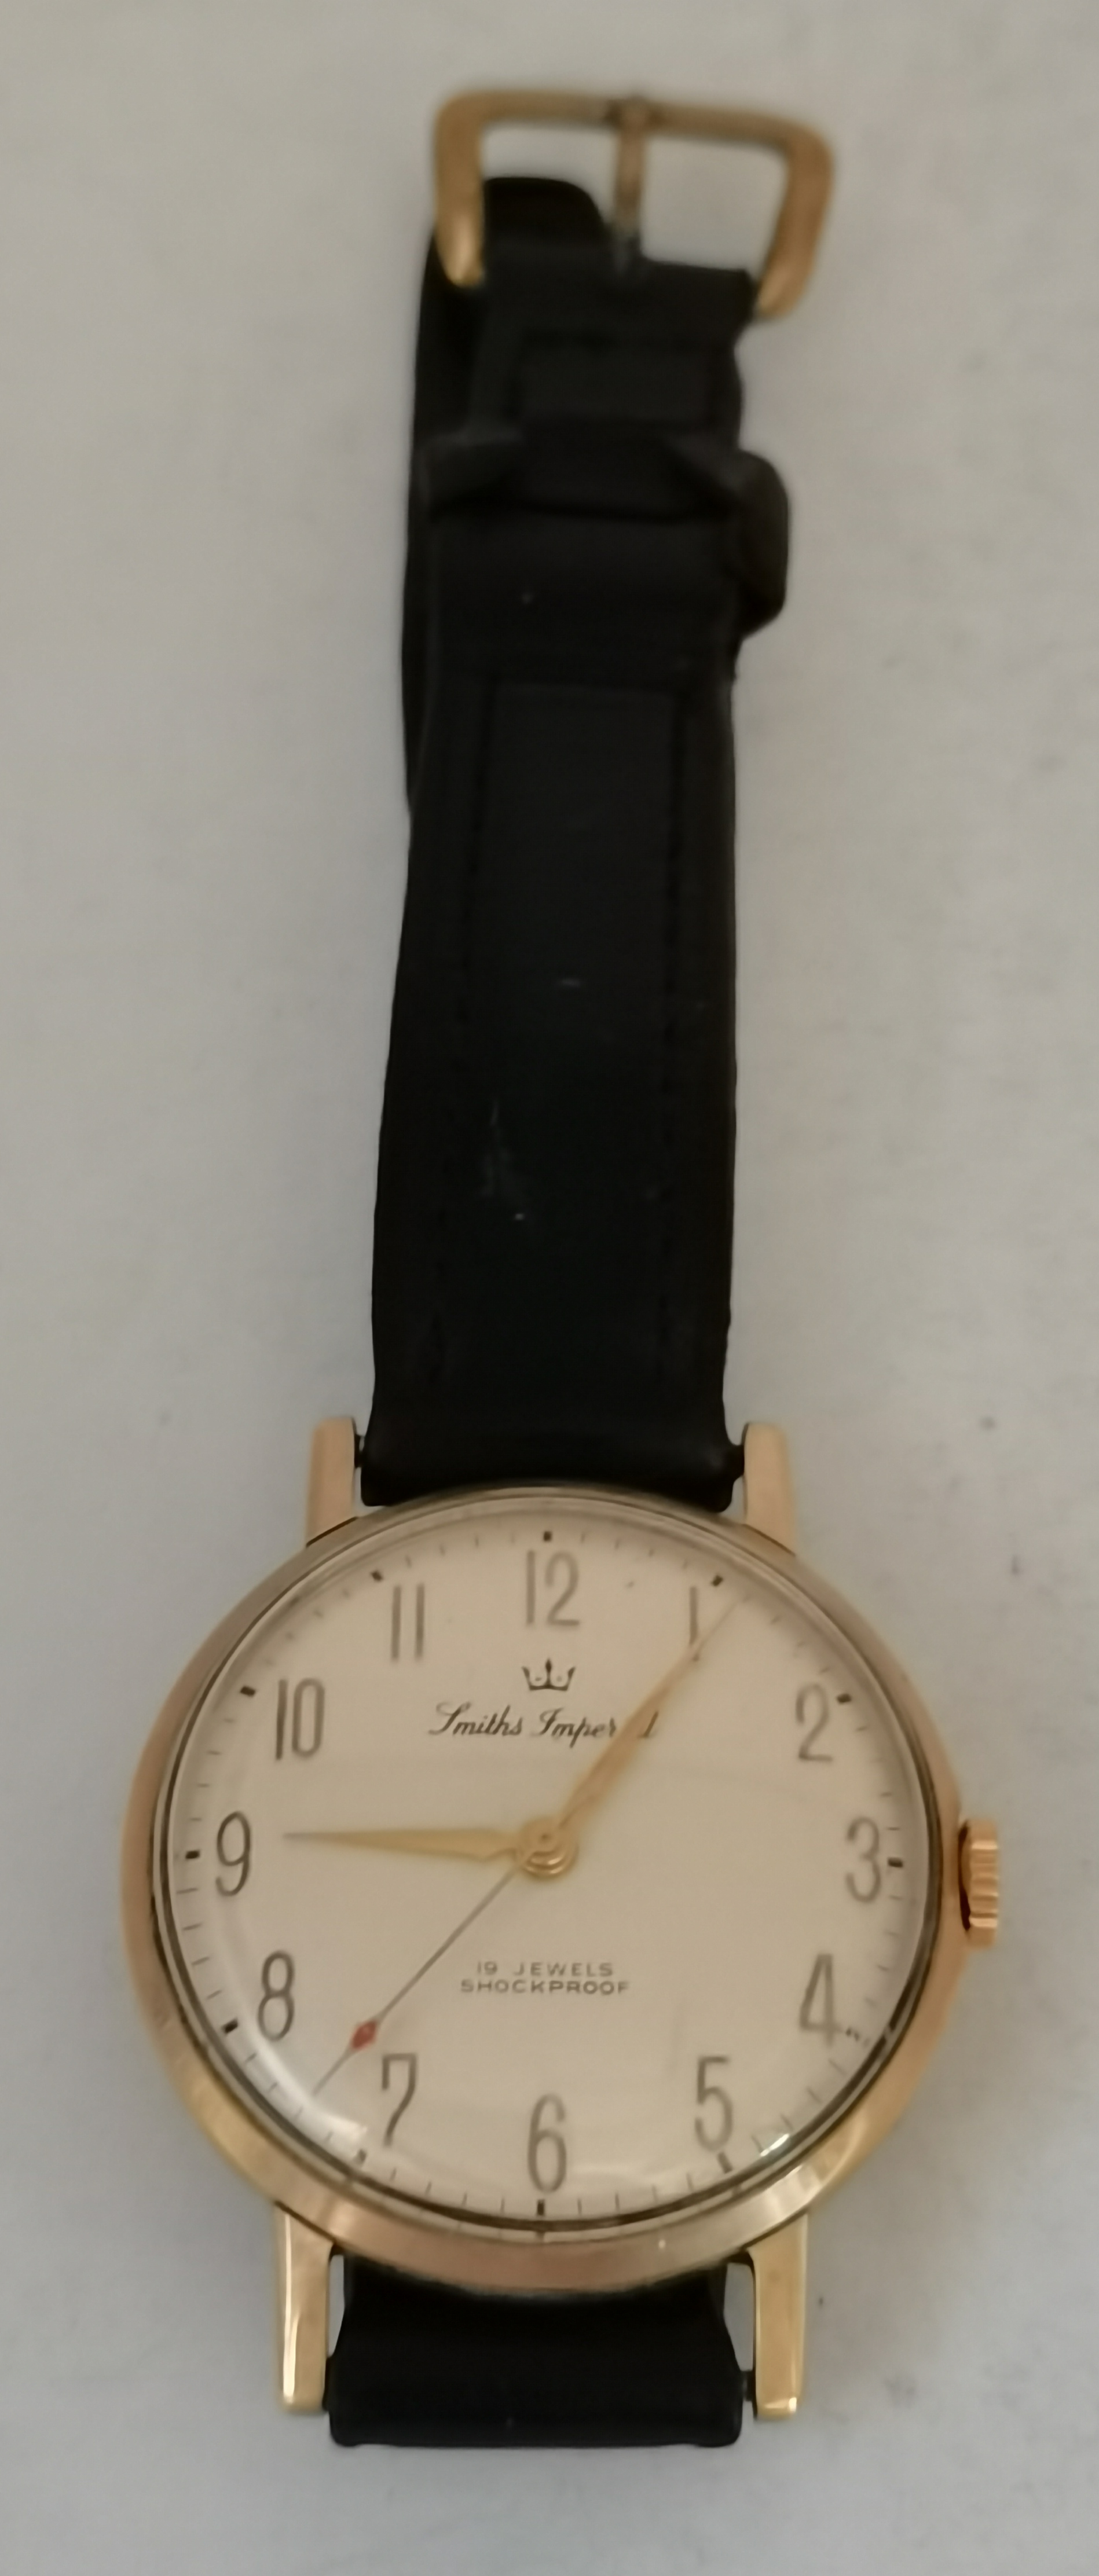 Two 9 carat gold wristwatches - Image 2 of 5